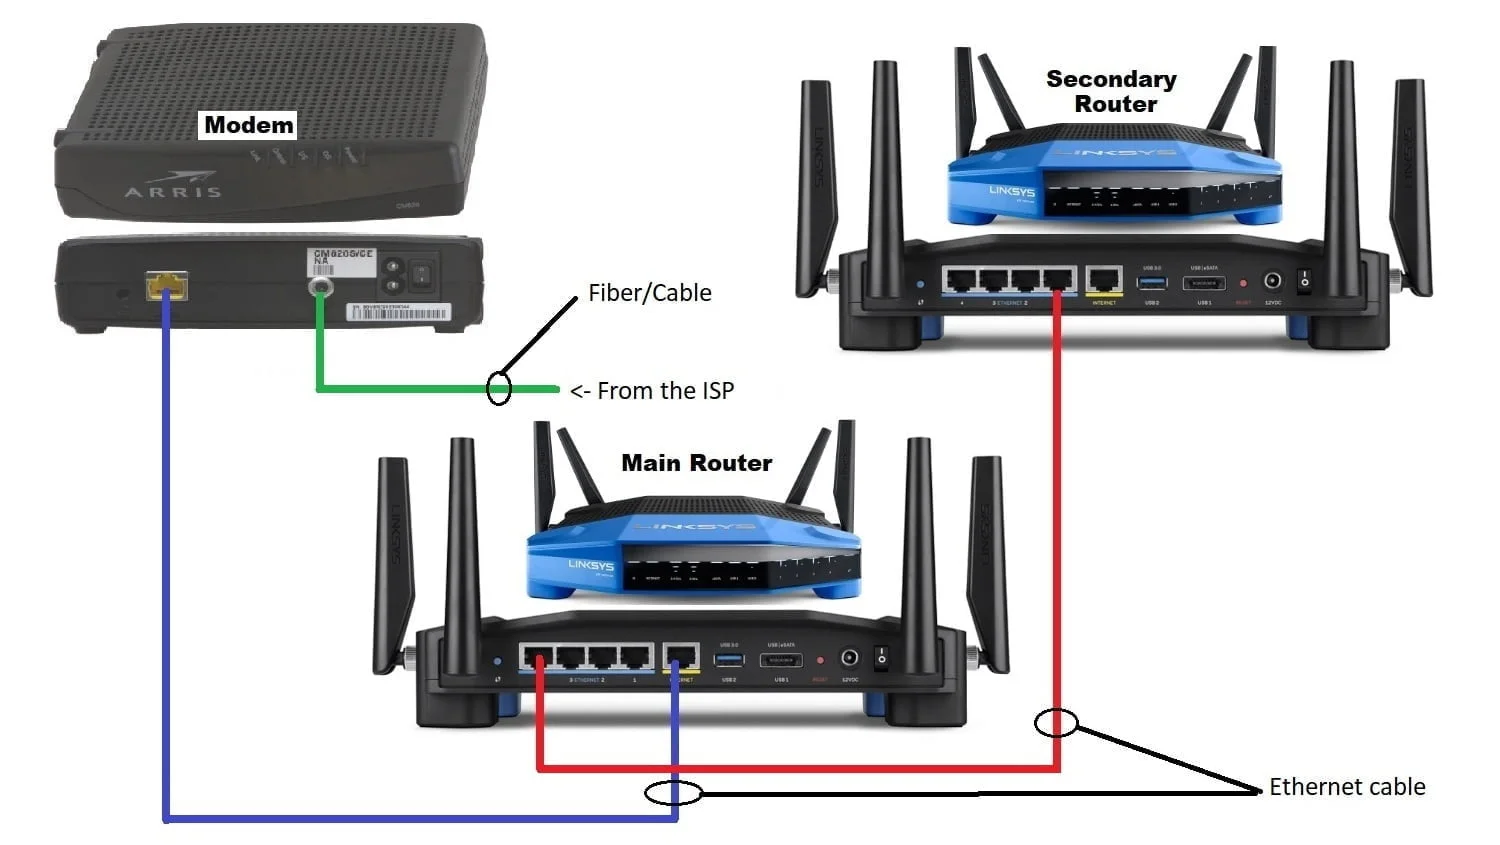 Secondary router as access point